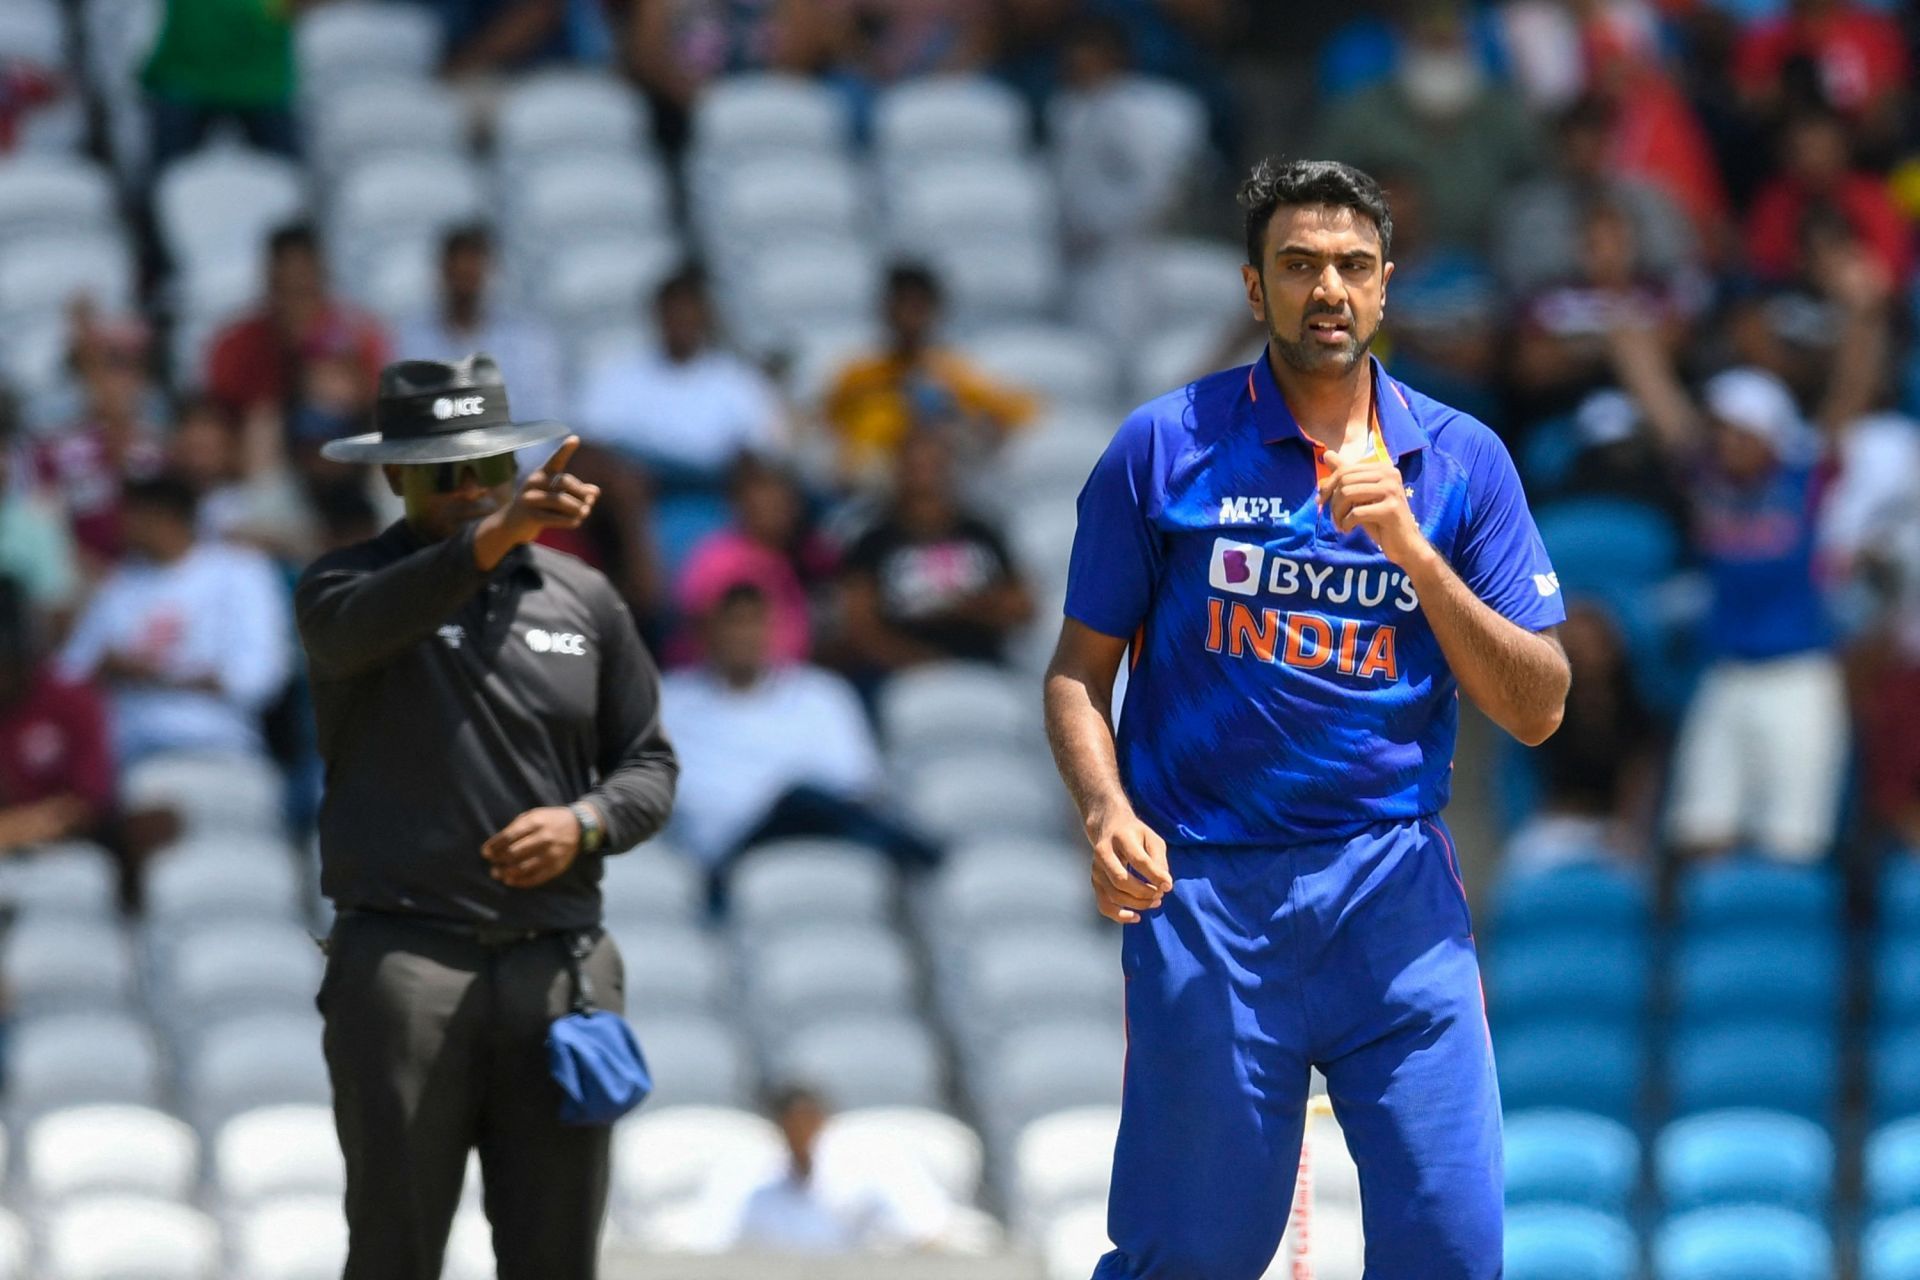 R Ashwin bowled an excellent spell in the first T20I [P/C: BCCI/Twitter]